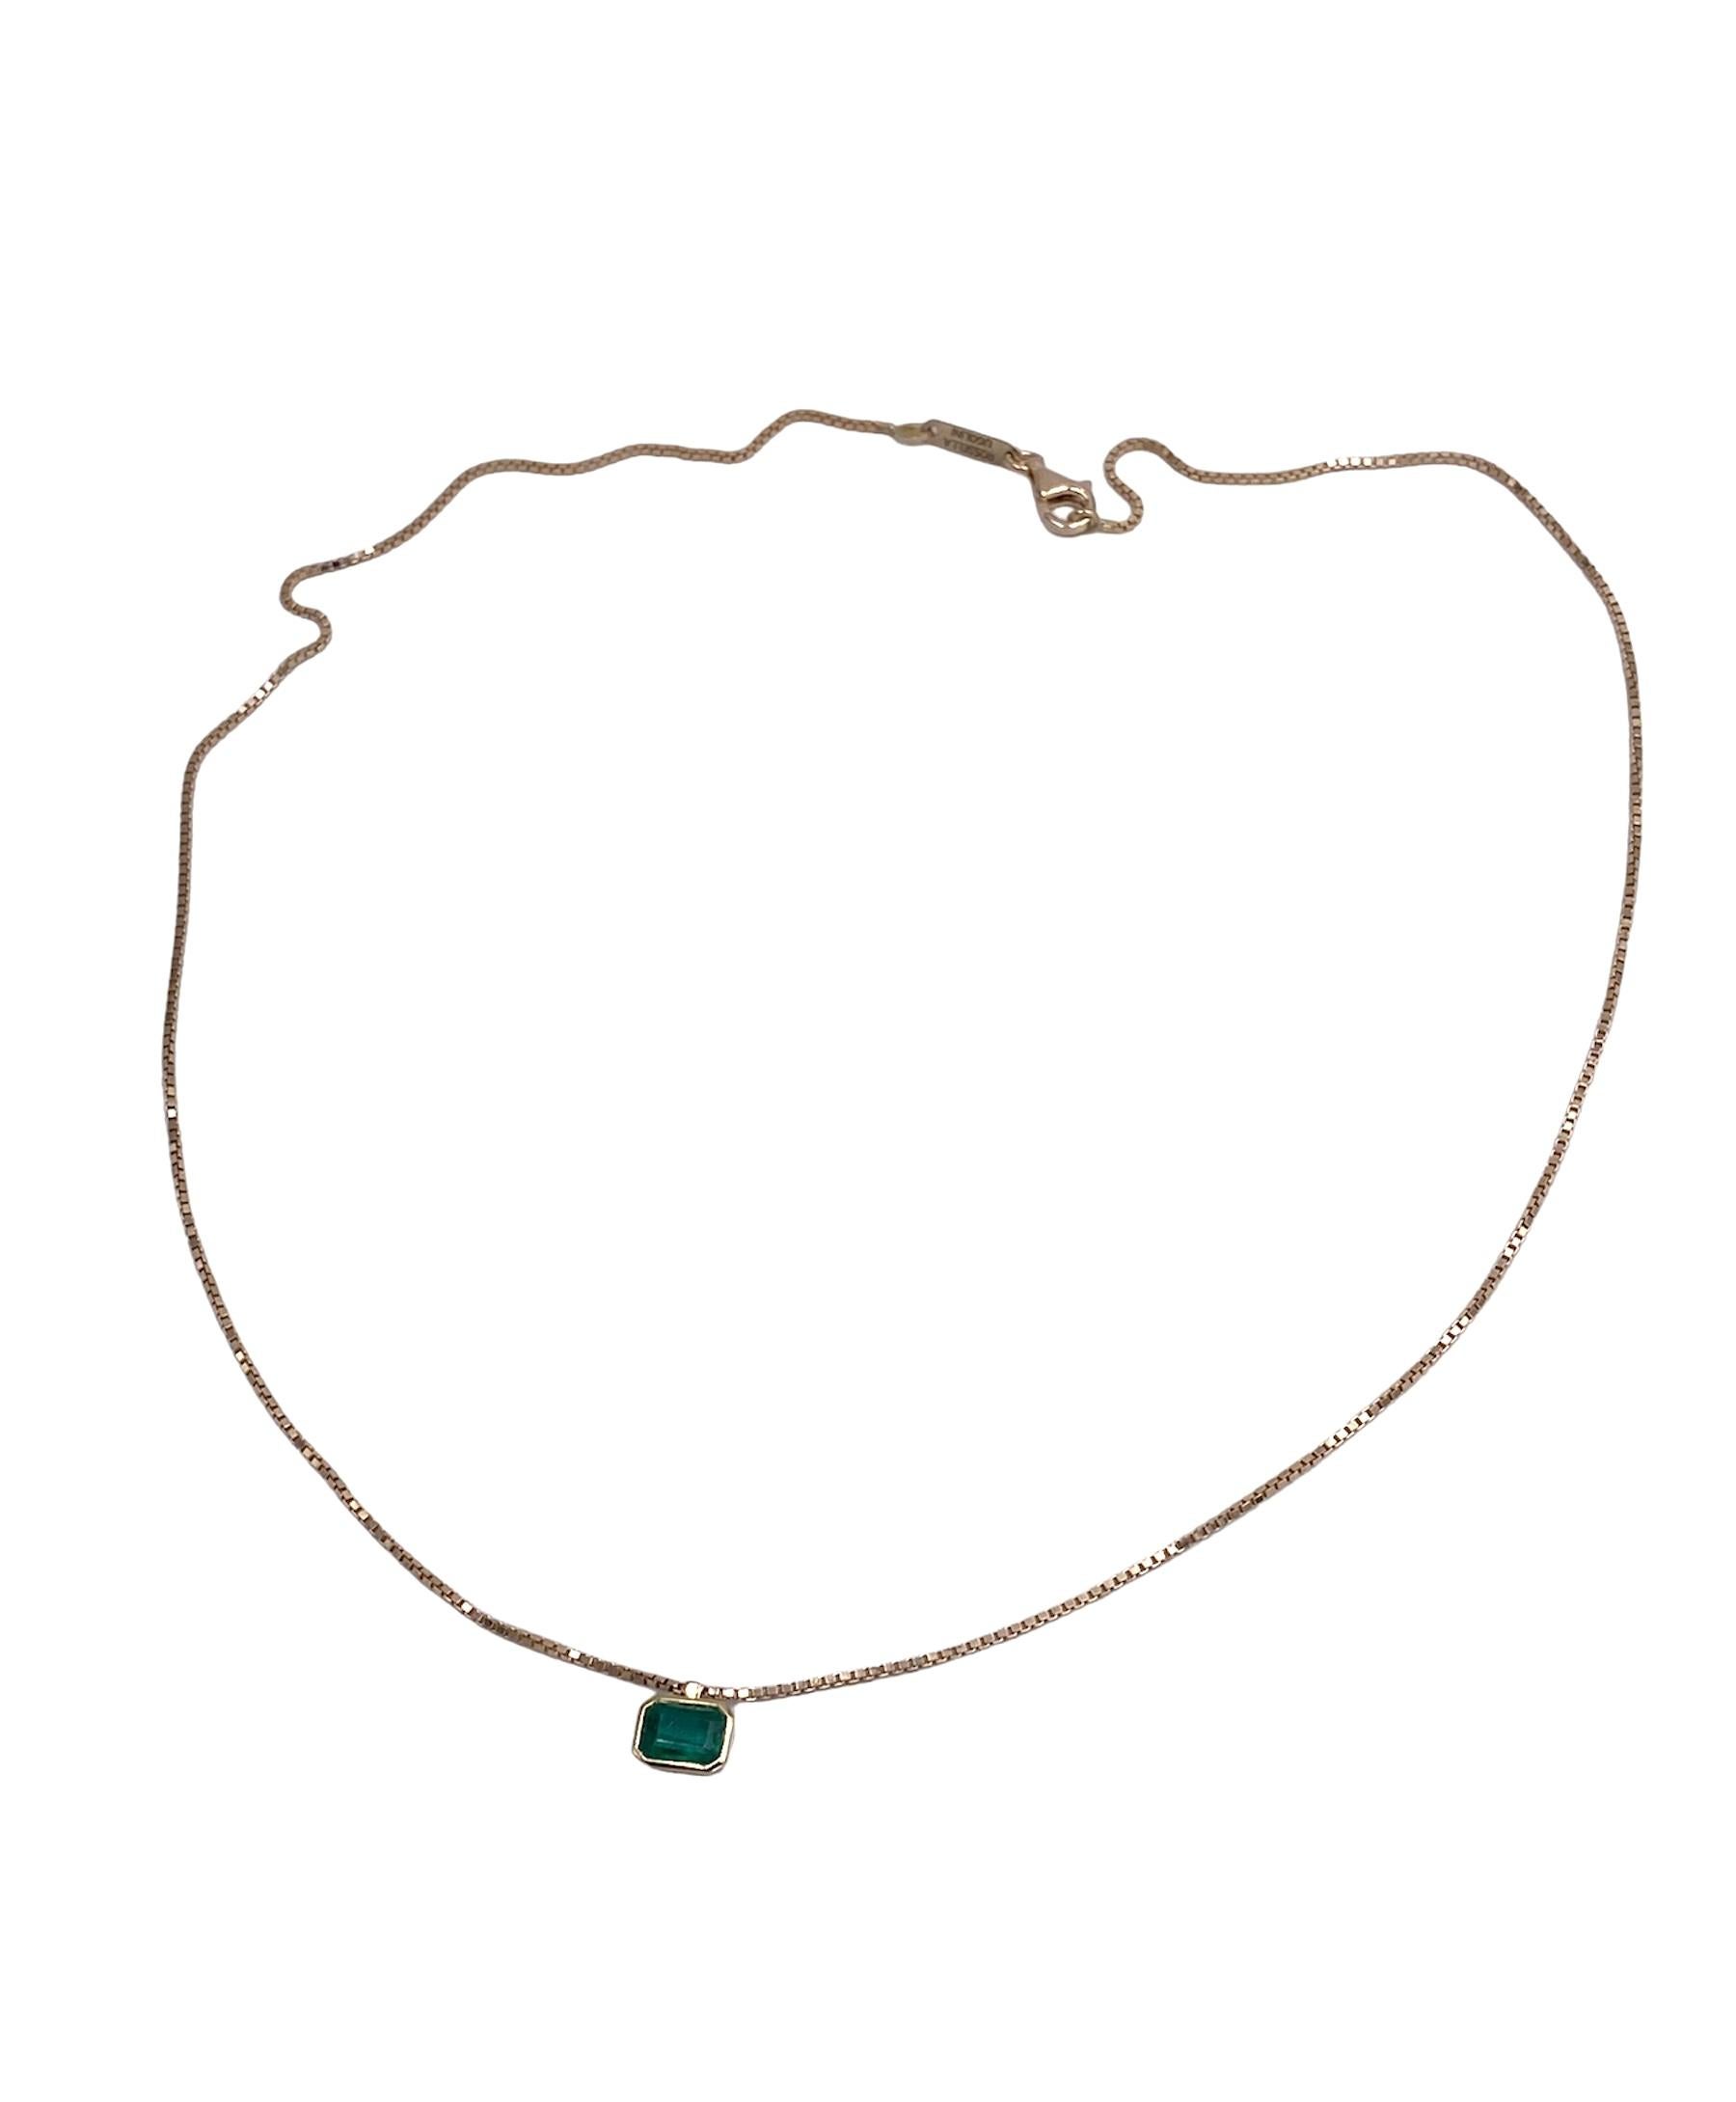 Rossella Ugolini Modern Emerald Man Necklace Crafted in Italy 18K Yellow Gold For Sale 4